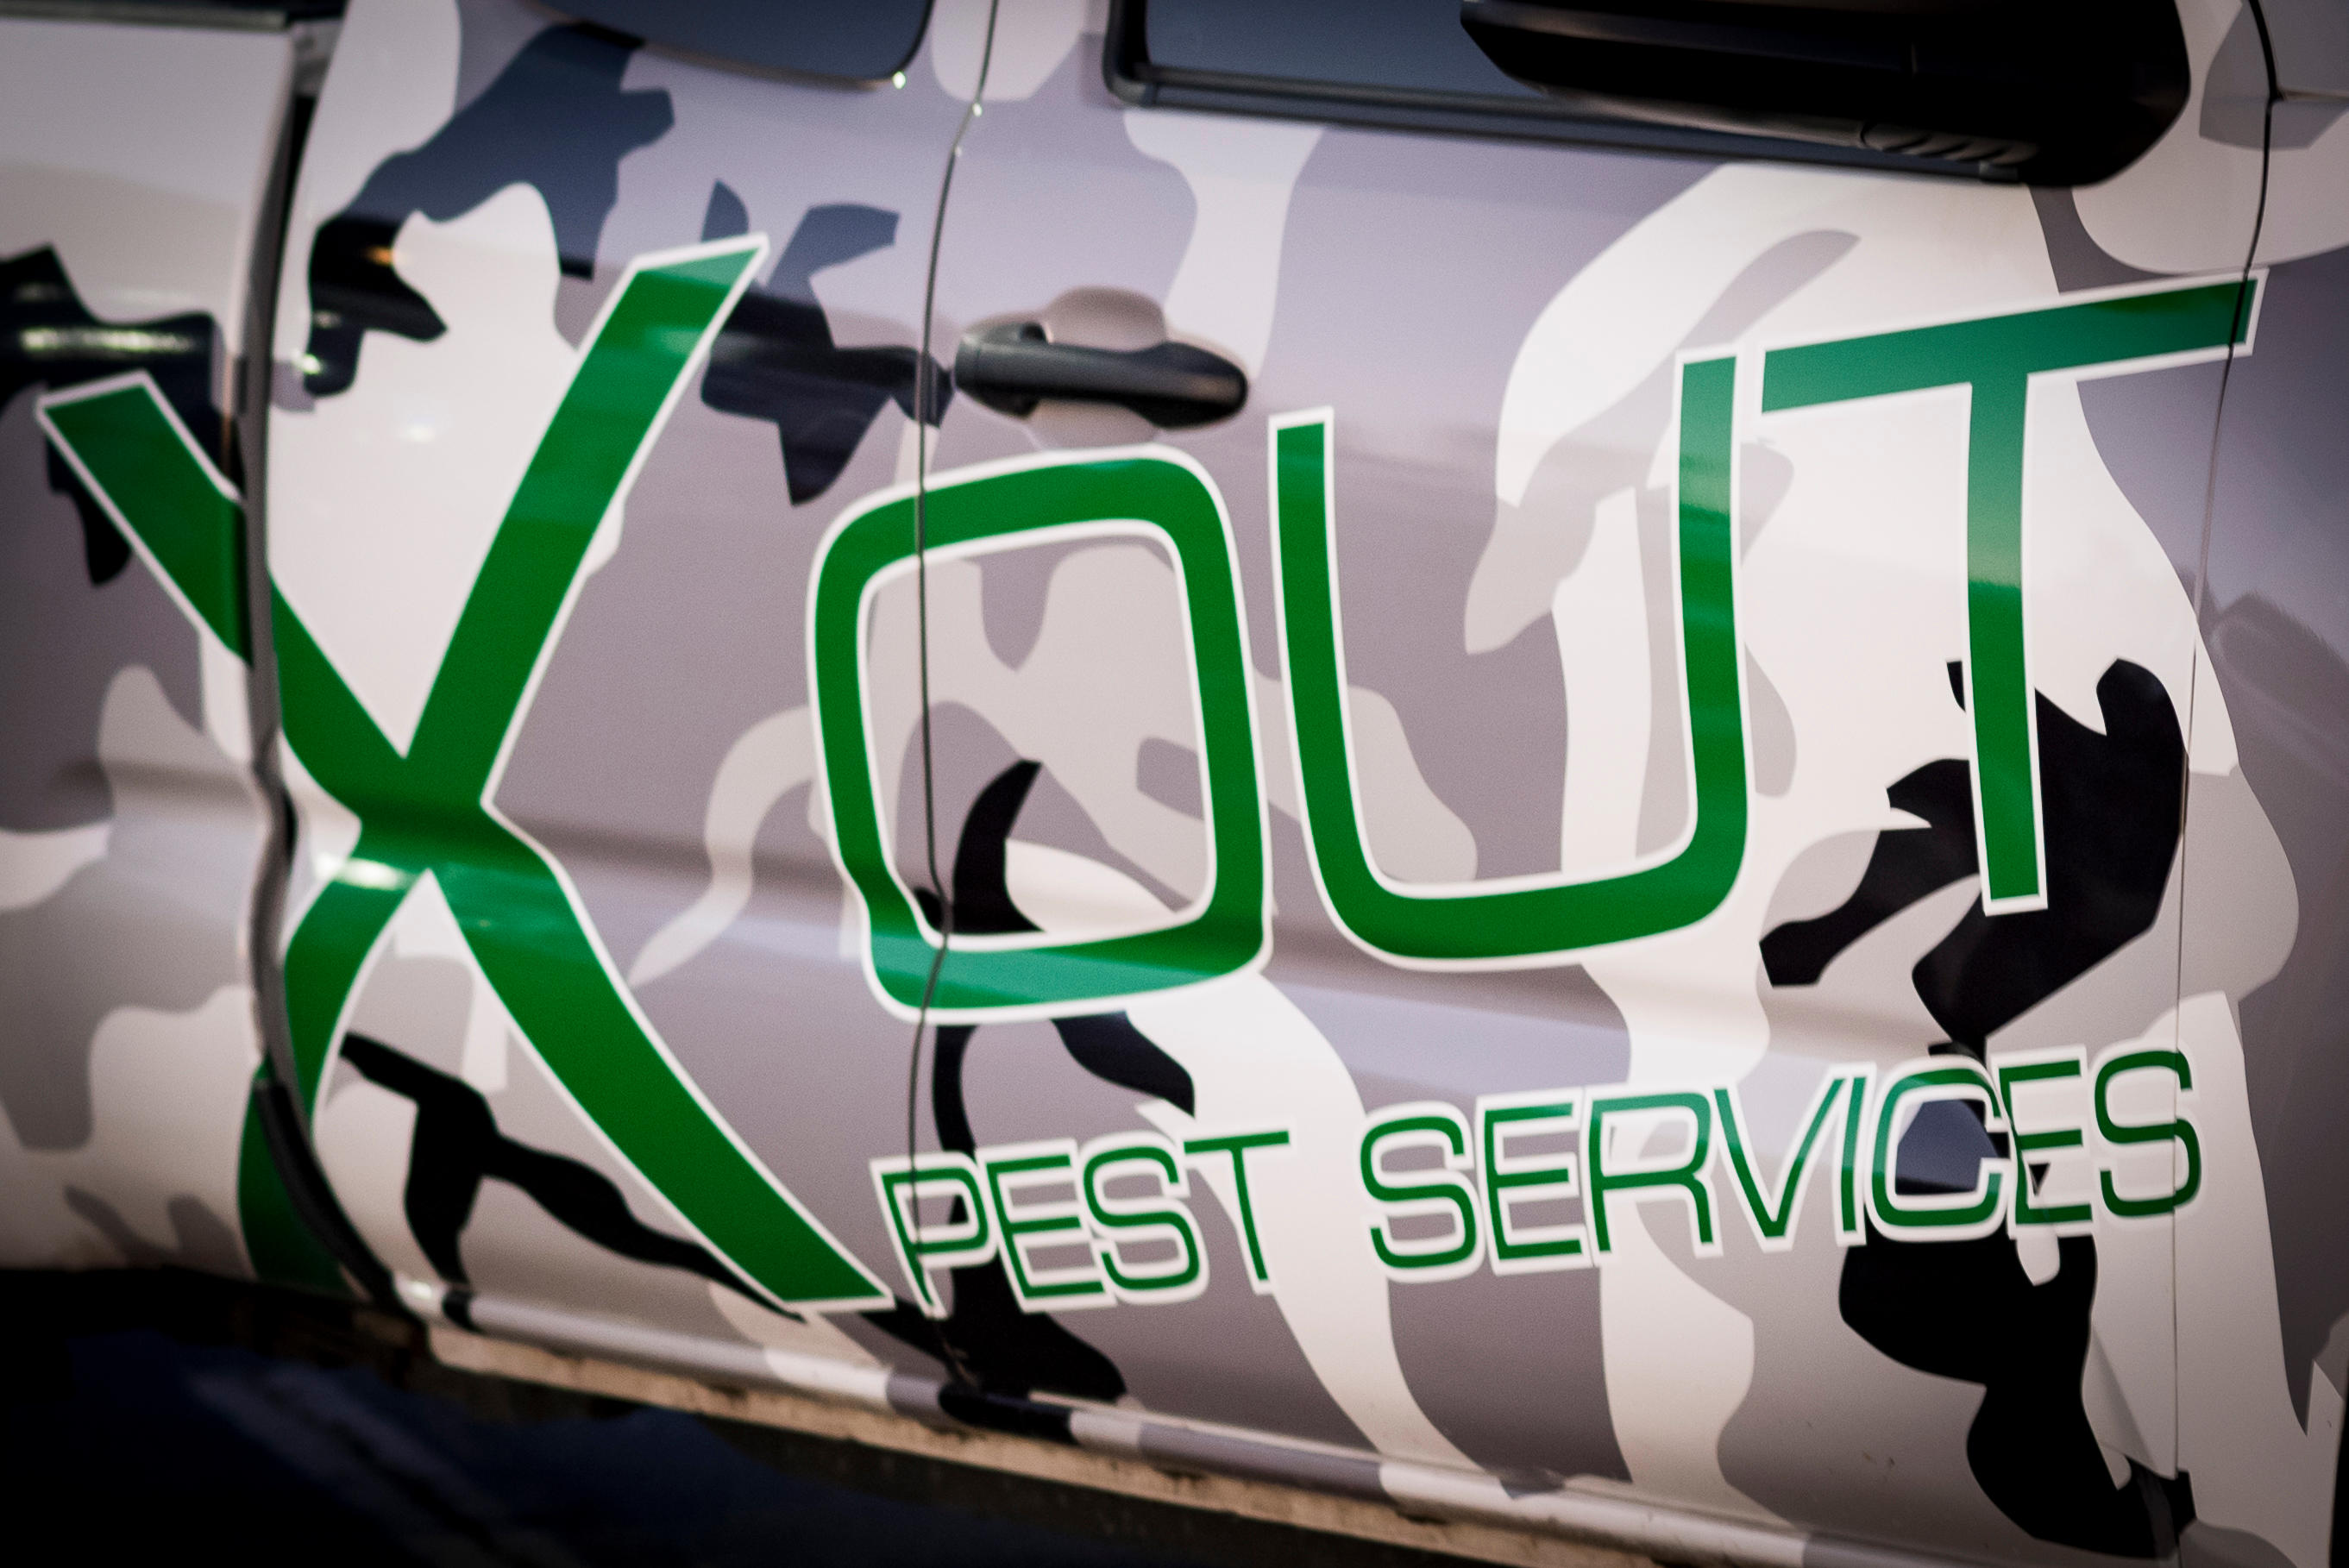 X Out Pest Services St. George (801)372-5782